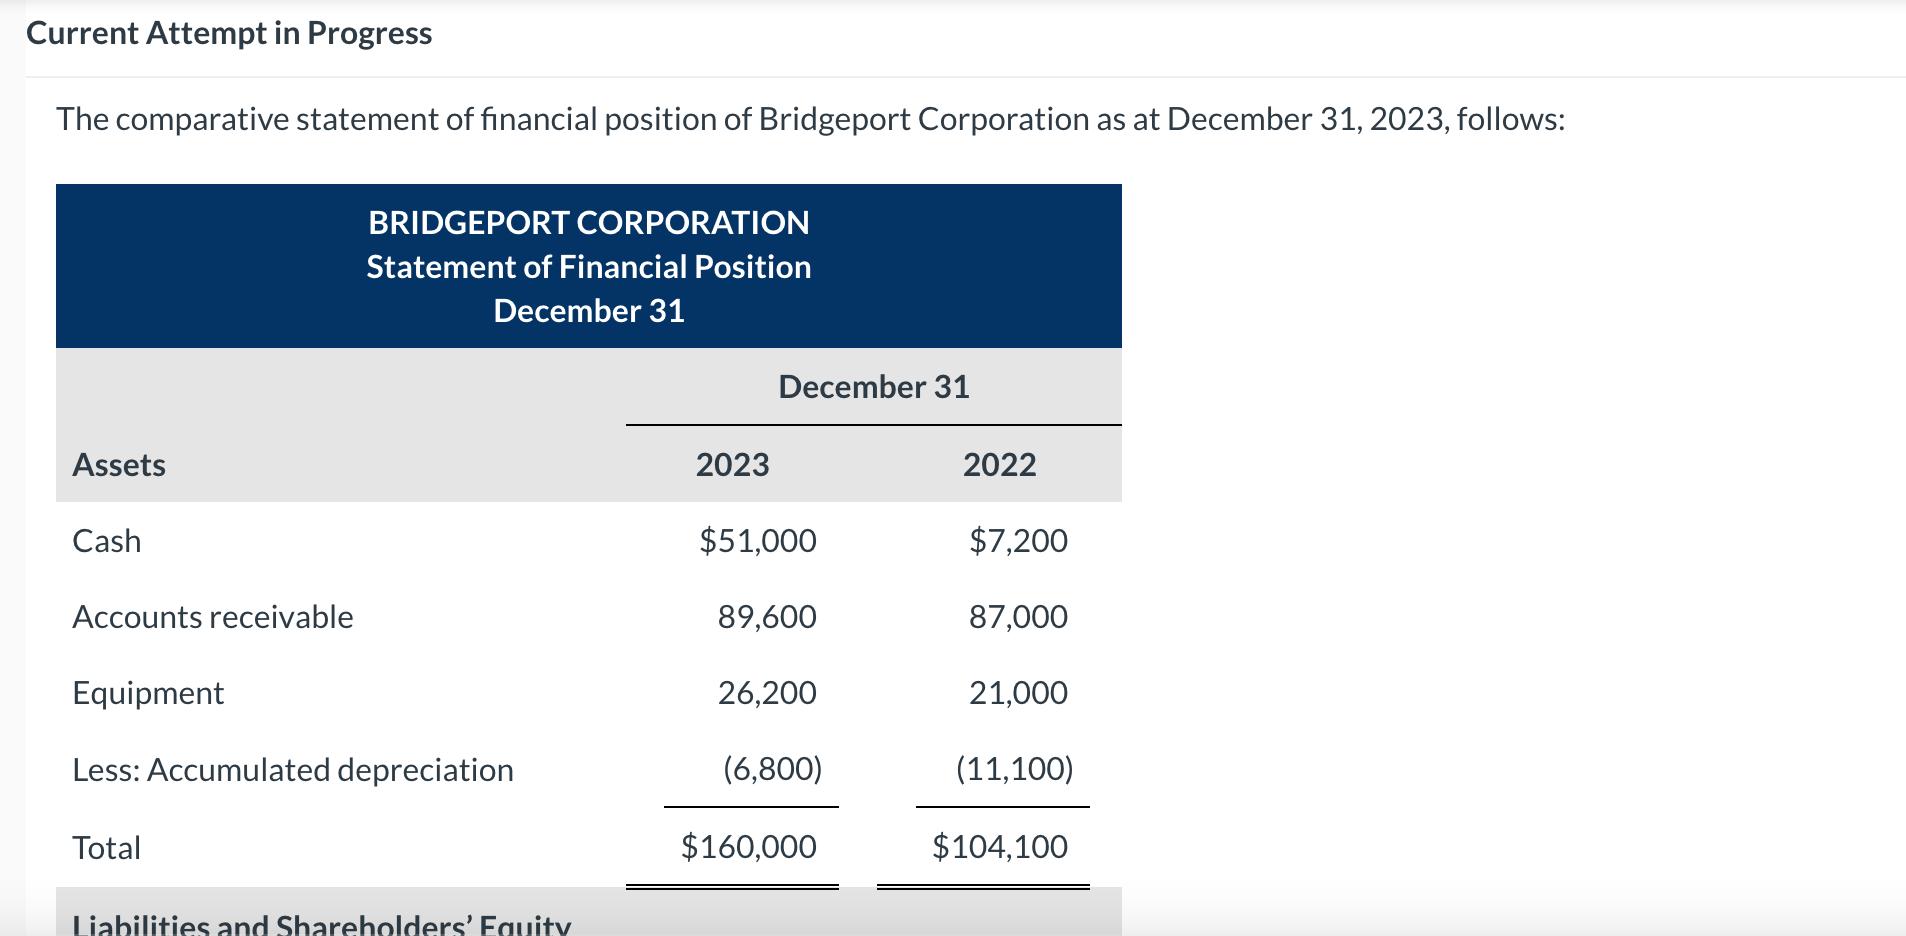 Current Attempt in Progress The comparative statement of financial position of Bridgeport Corporation as at December 31, 2023